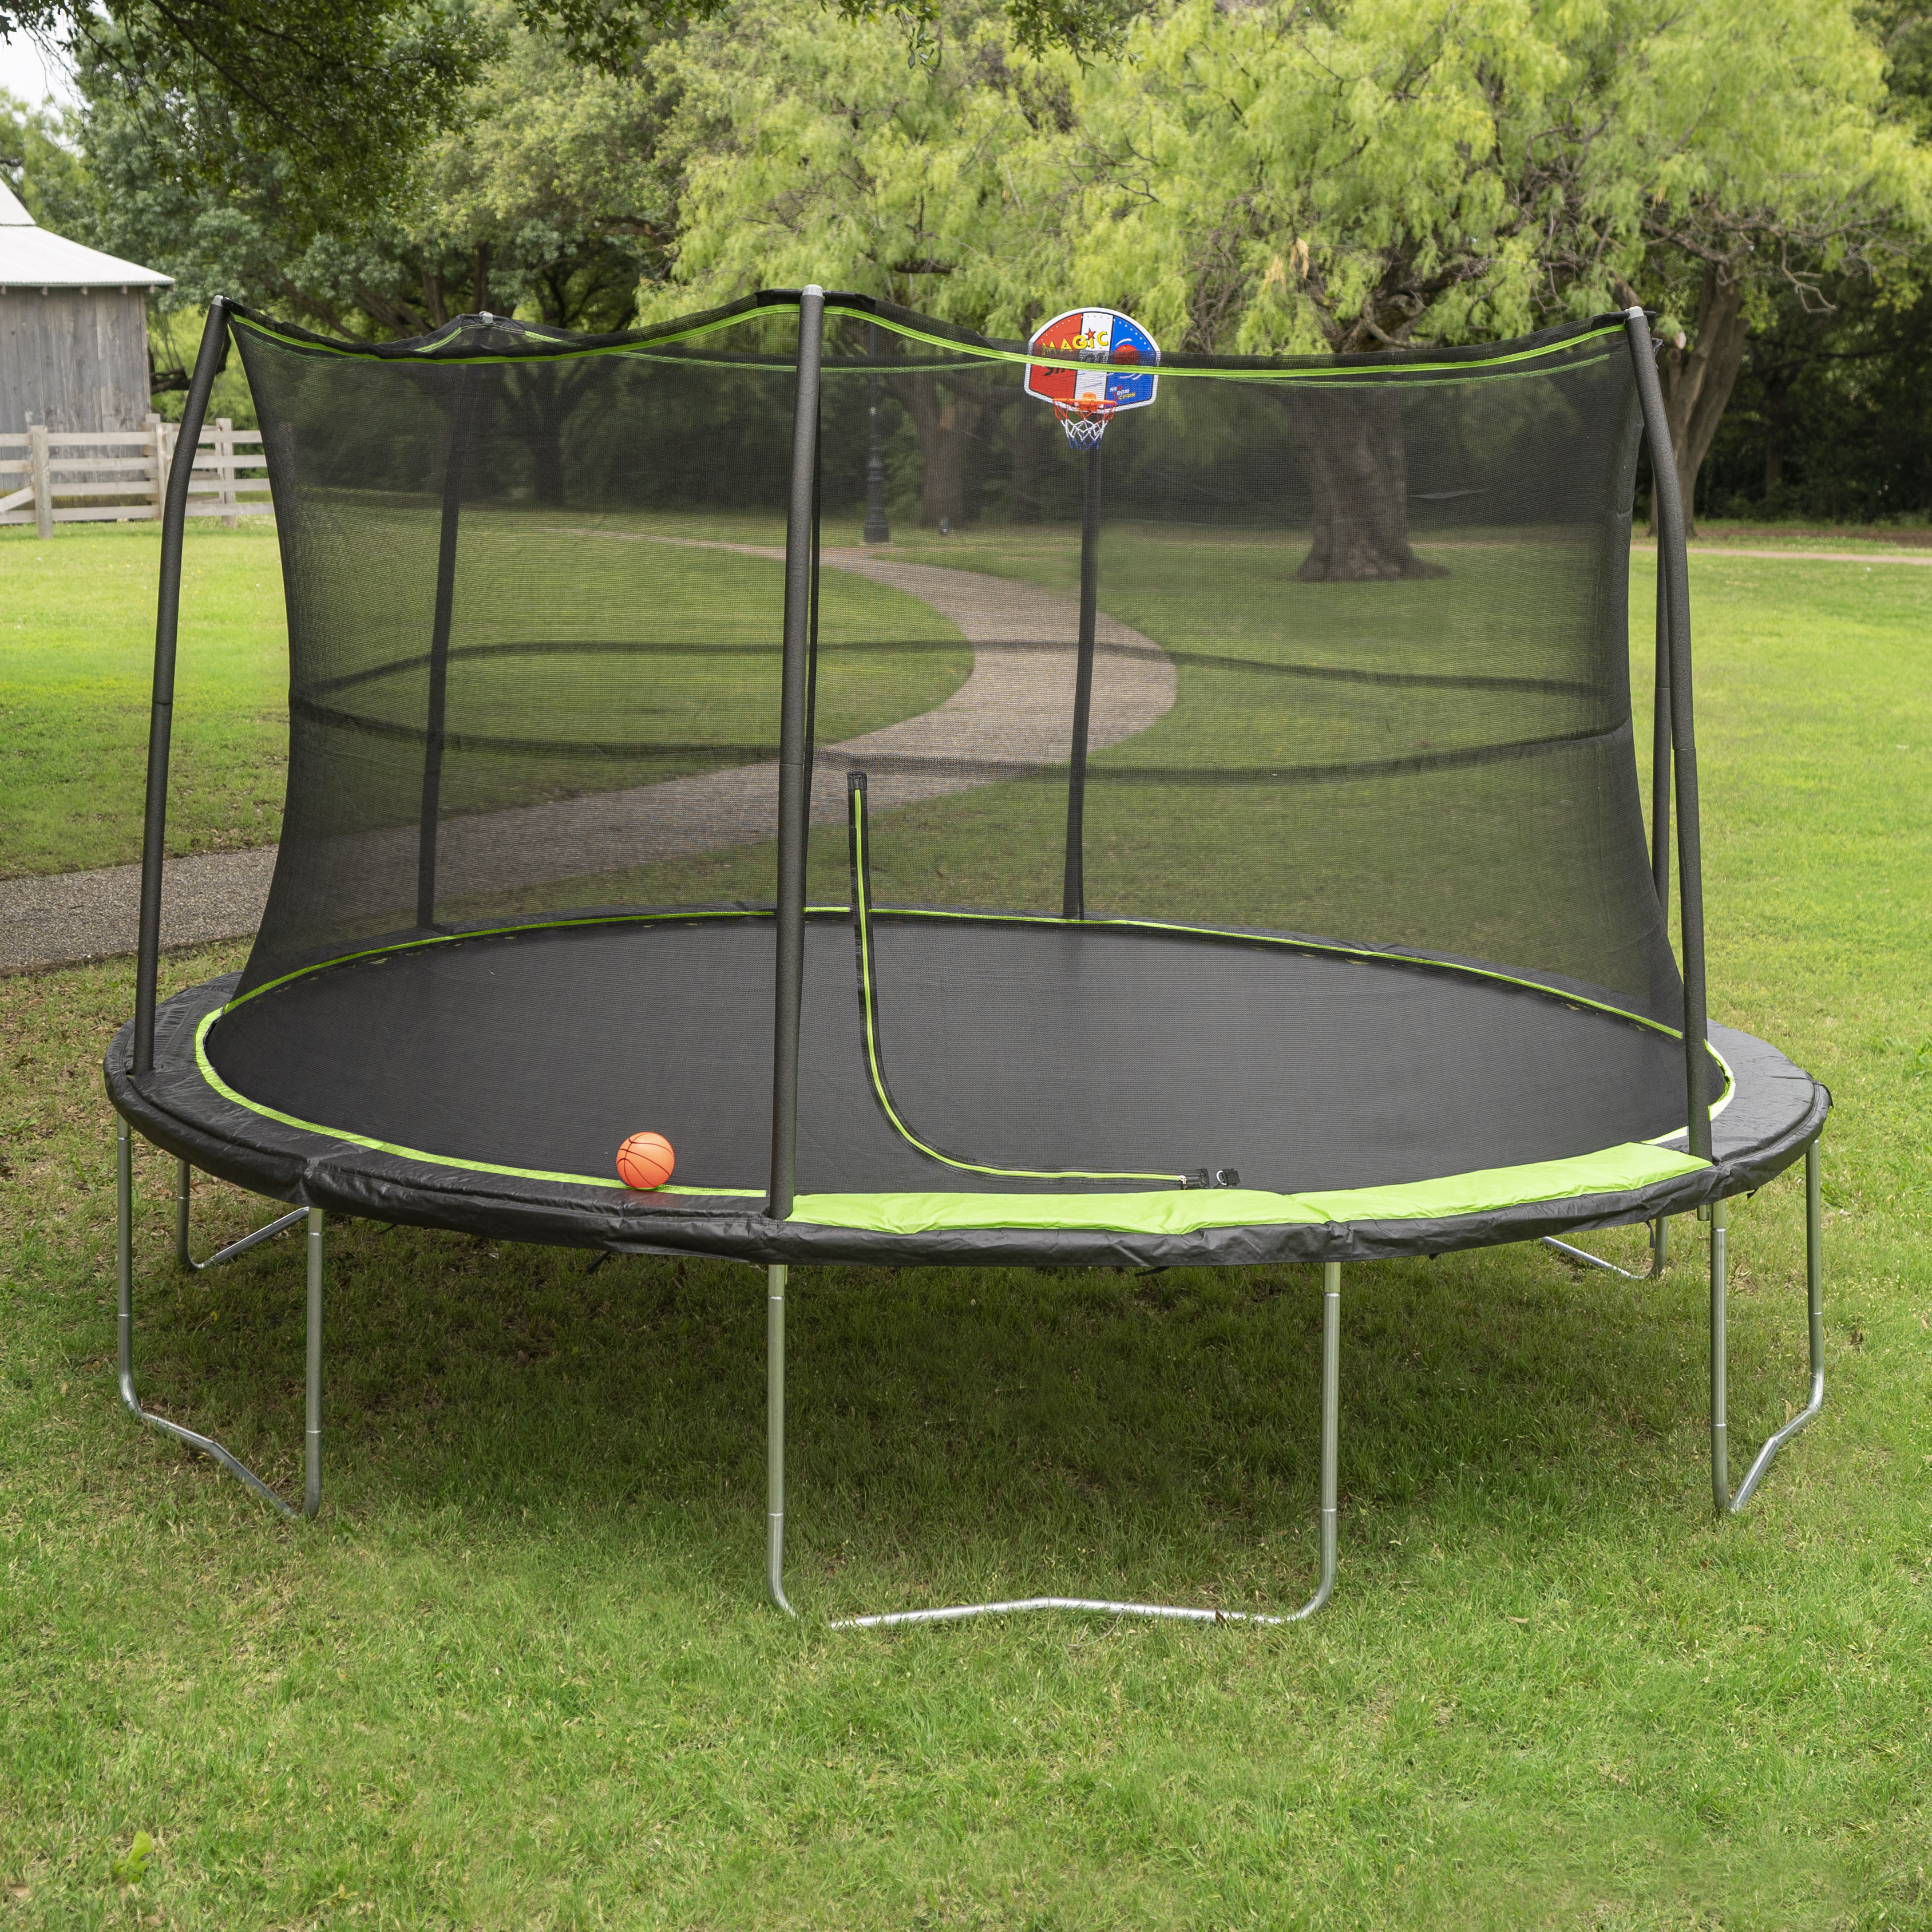 Jump King 14ft Trampoline With Basketball Hoop, Safety Enclosure, Green - image 1 of 10